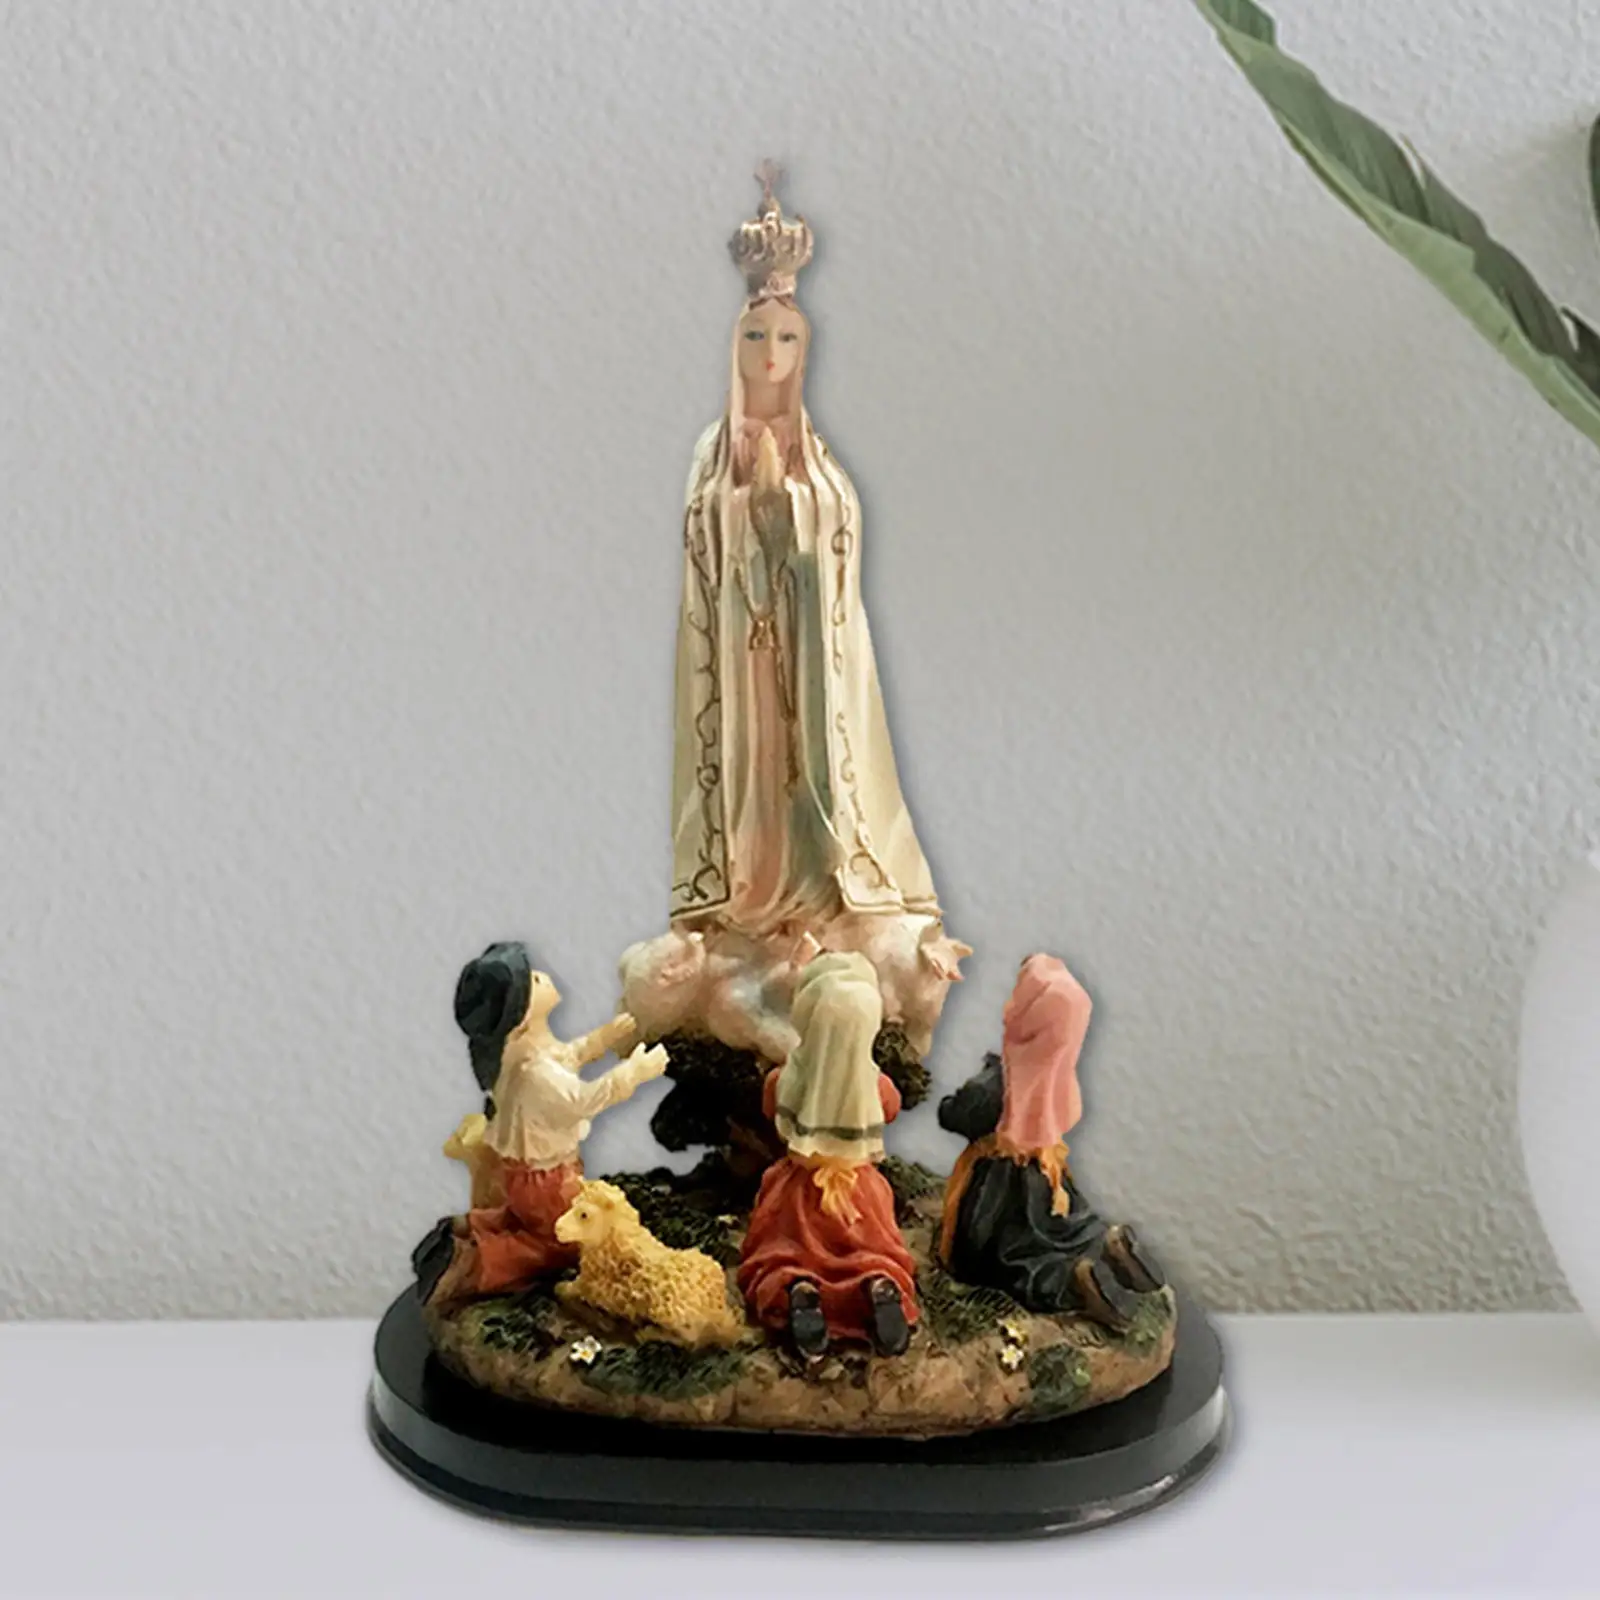 Virgin Mary Decorative Cultural Pray Collectibles for Tabletop Home Sister Follower